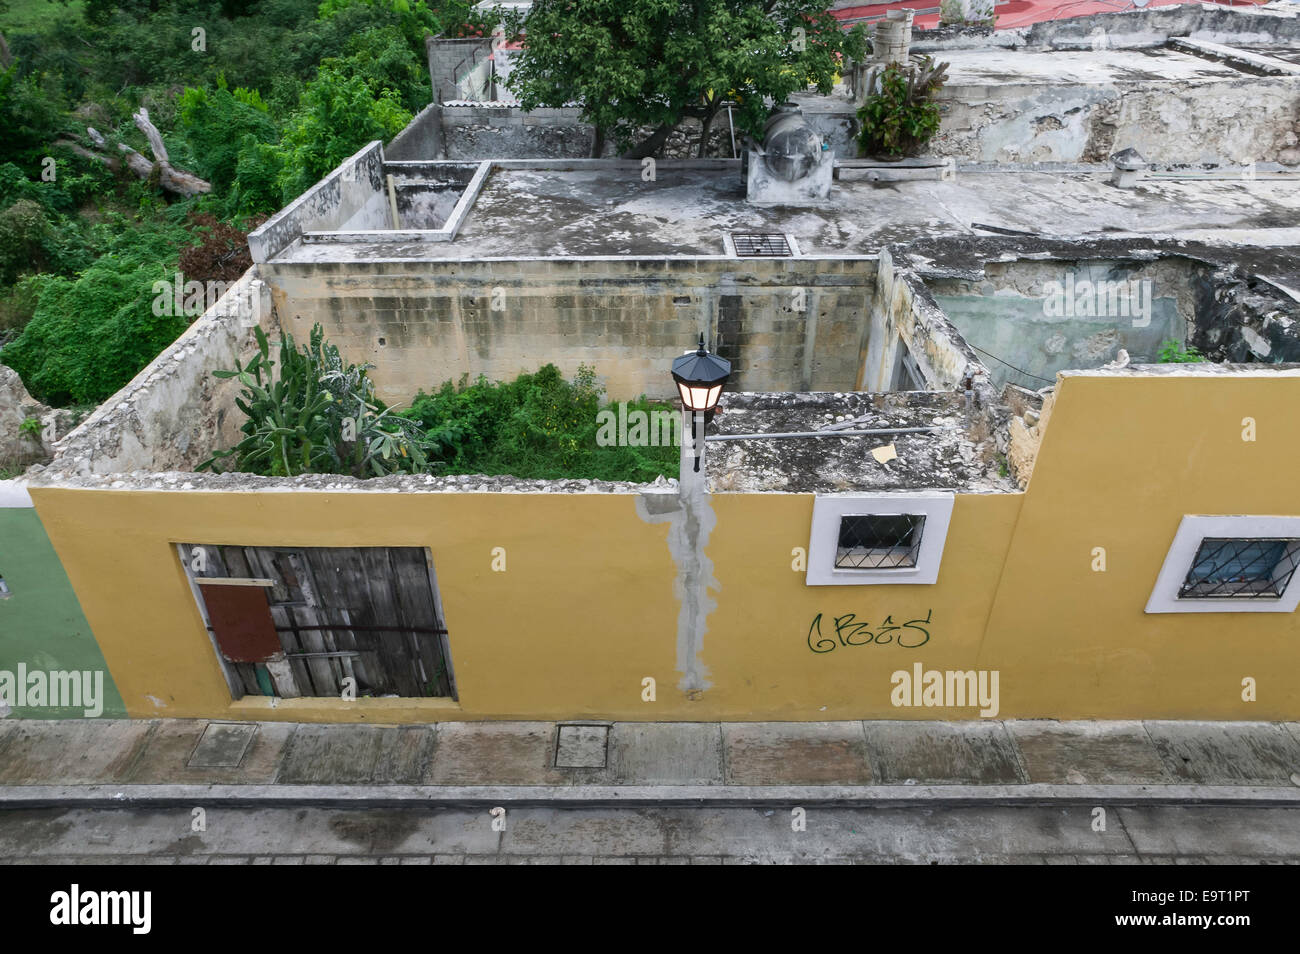 Spanish colonial house with collapsed roof being reclaimed by nature, Campeche, Mexico Stock Photo